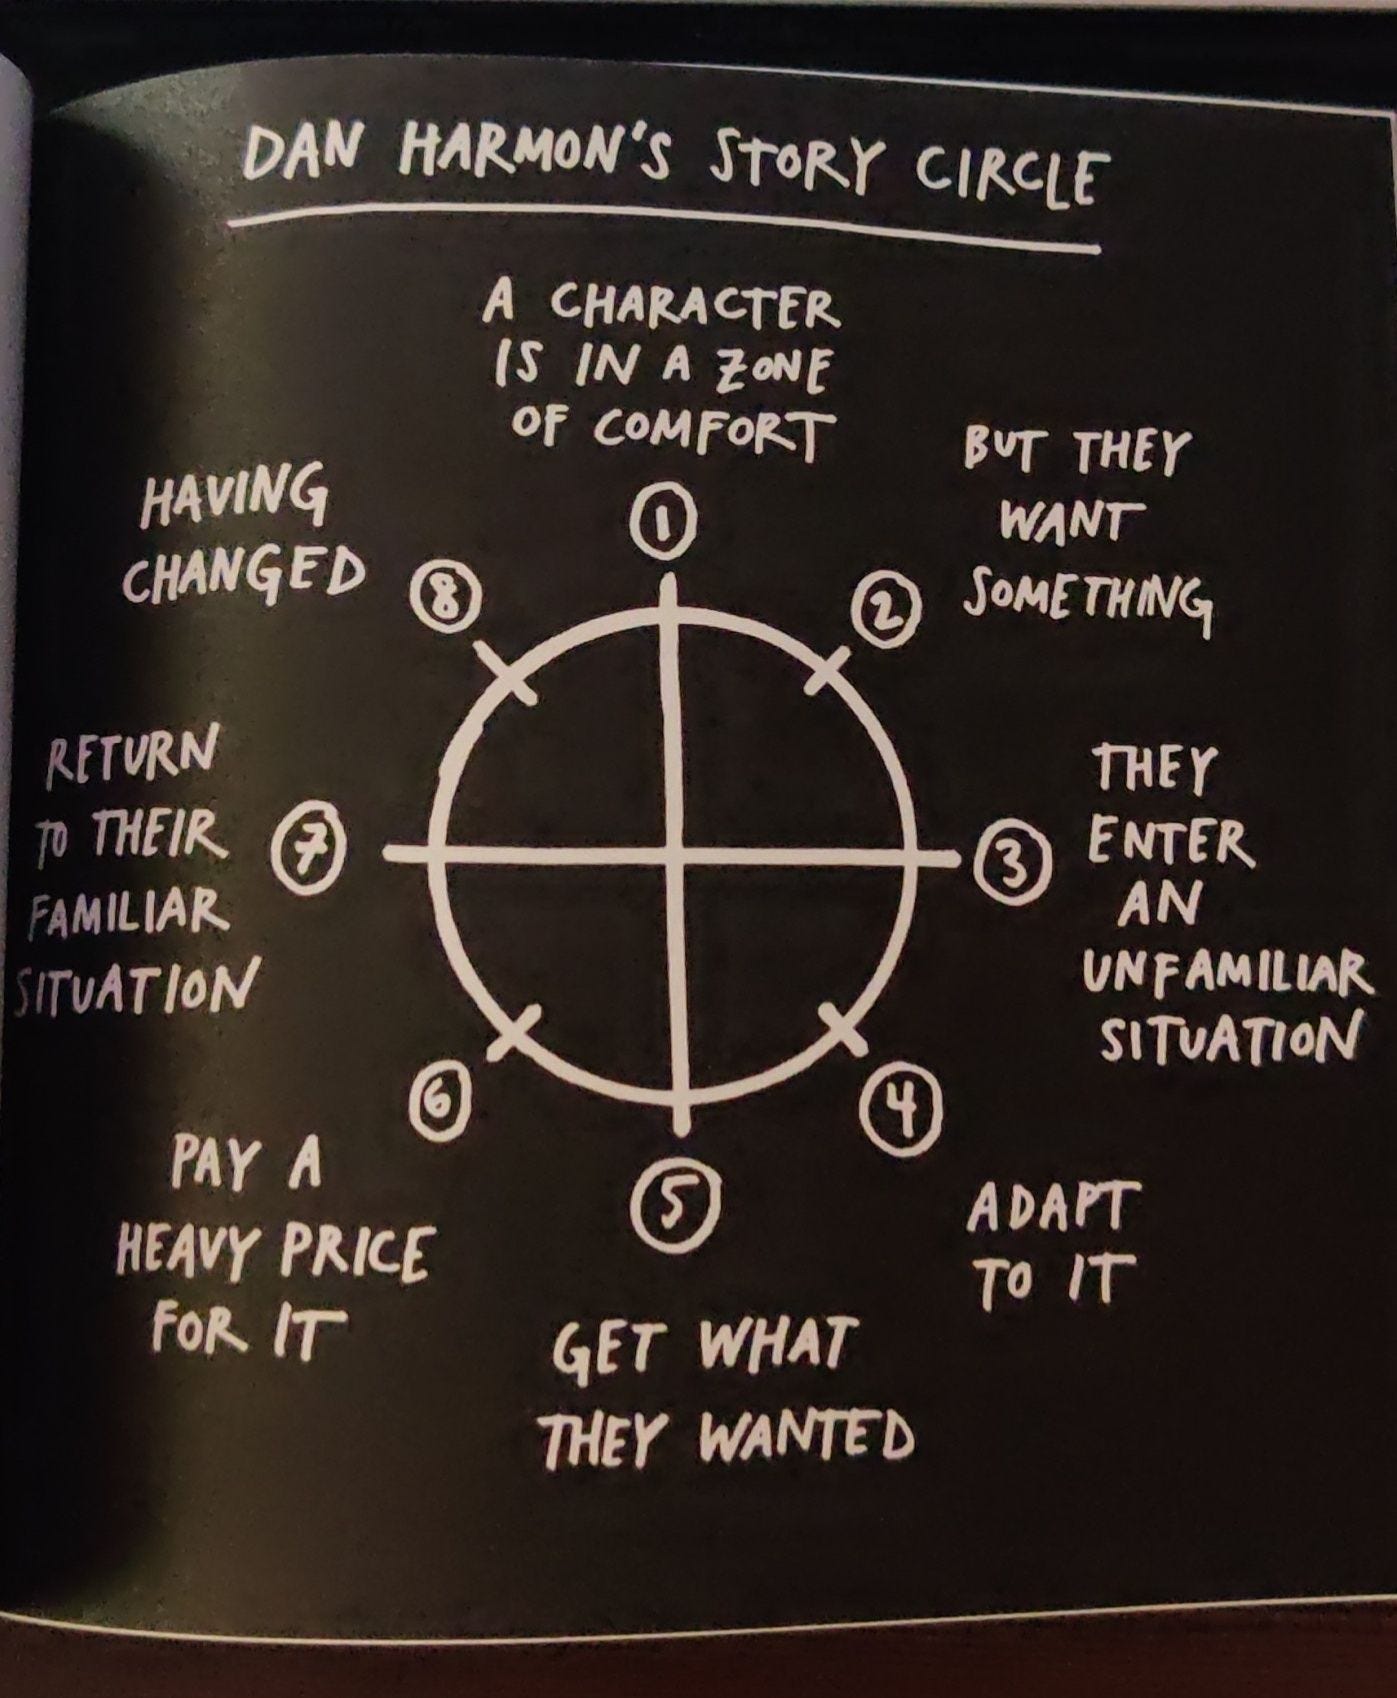 Dan Harmon's Story Circle - Illustration from Show Your Work by Austin Kleon